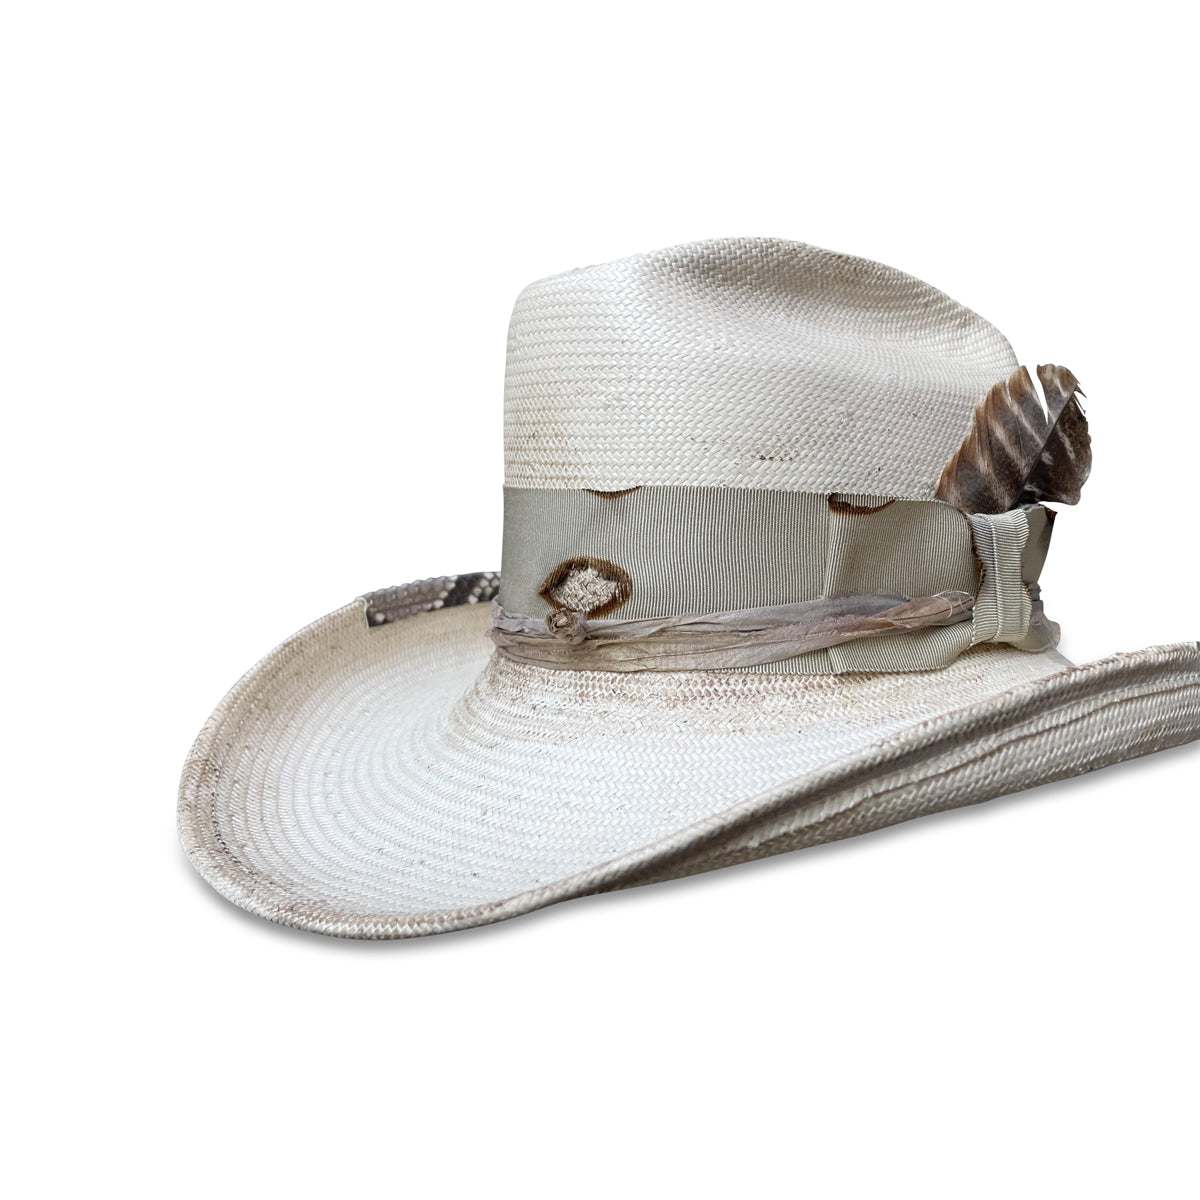 Stylish, made-to-order ivory straw cowboy hat with a distressed finish and exotic feather accent by Cha Cha's